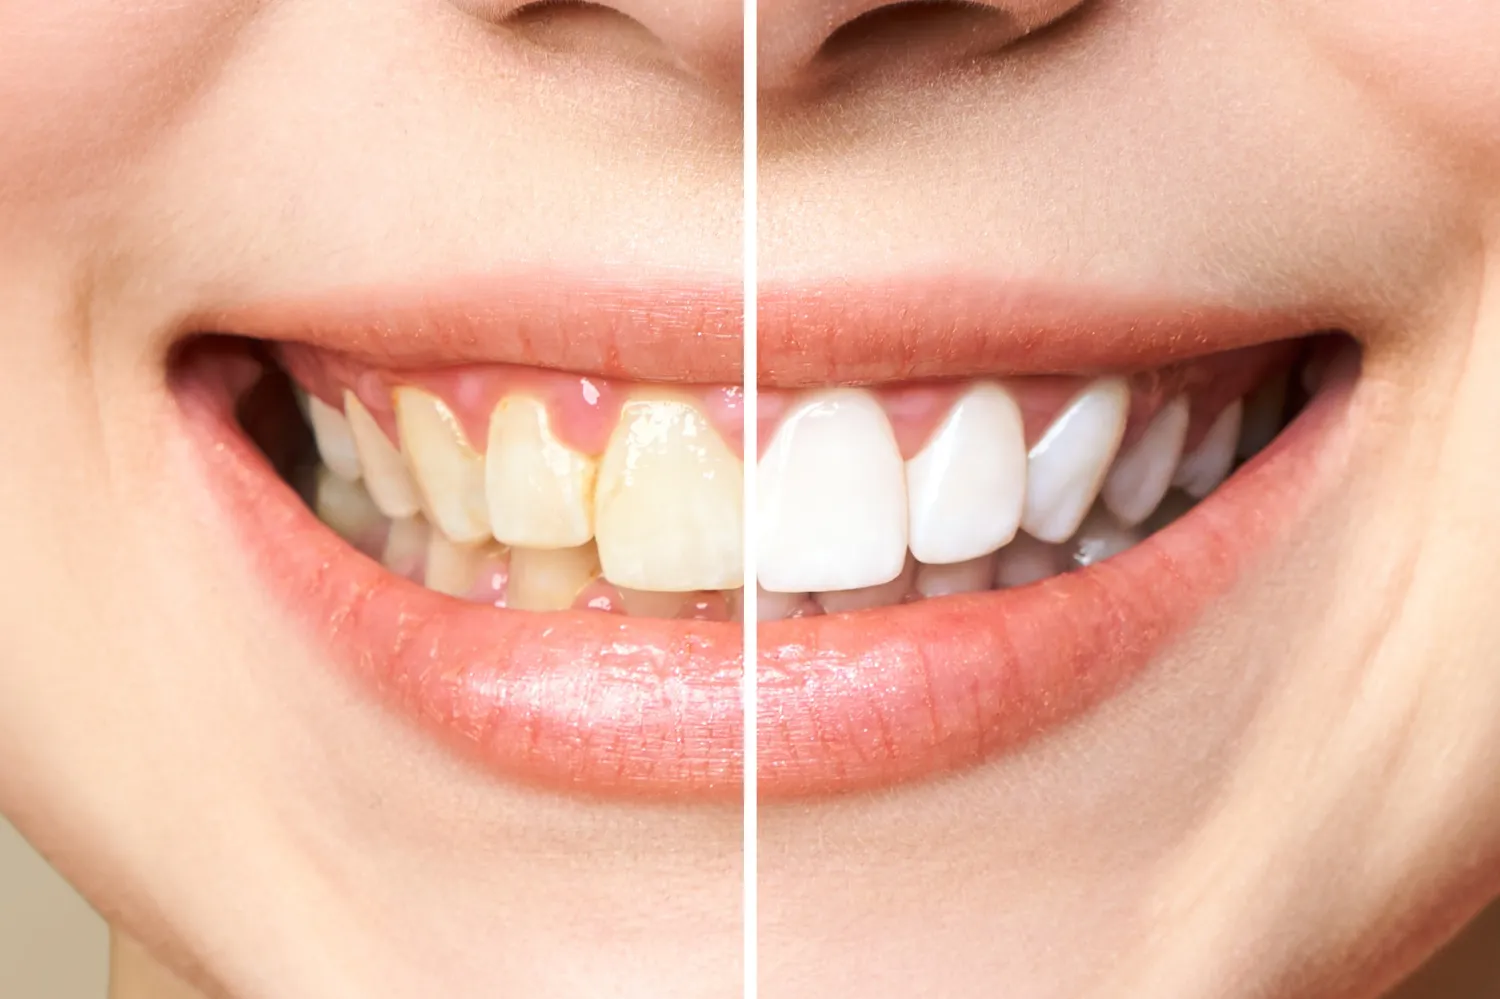 Before and after Teeth whitening in Kirkland, WA, comparison.